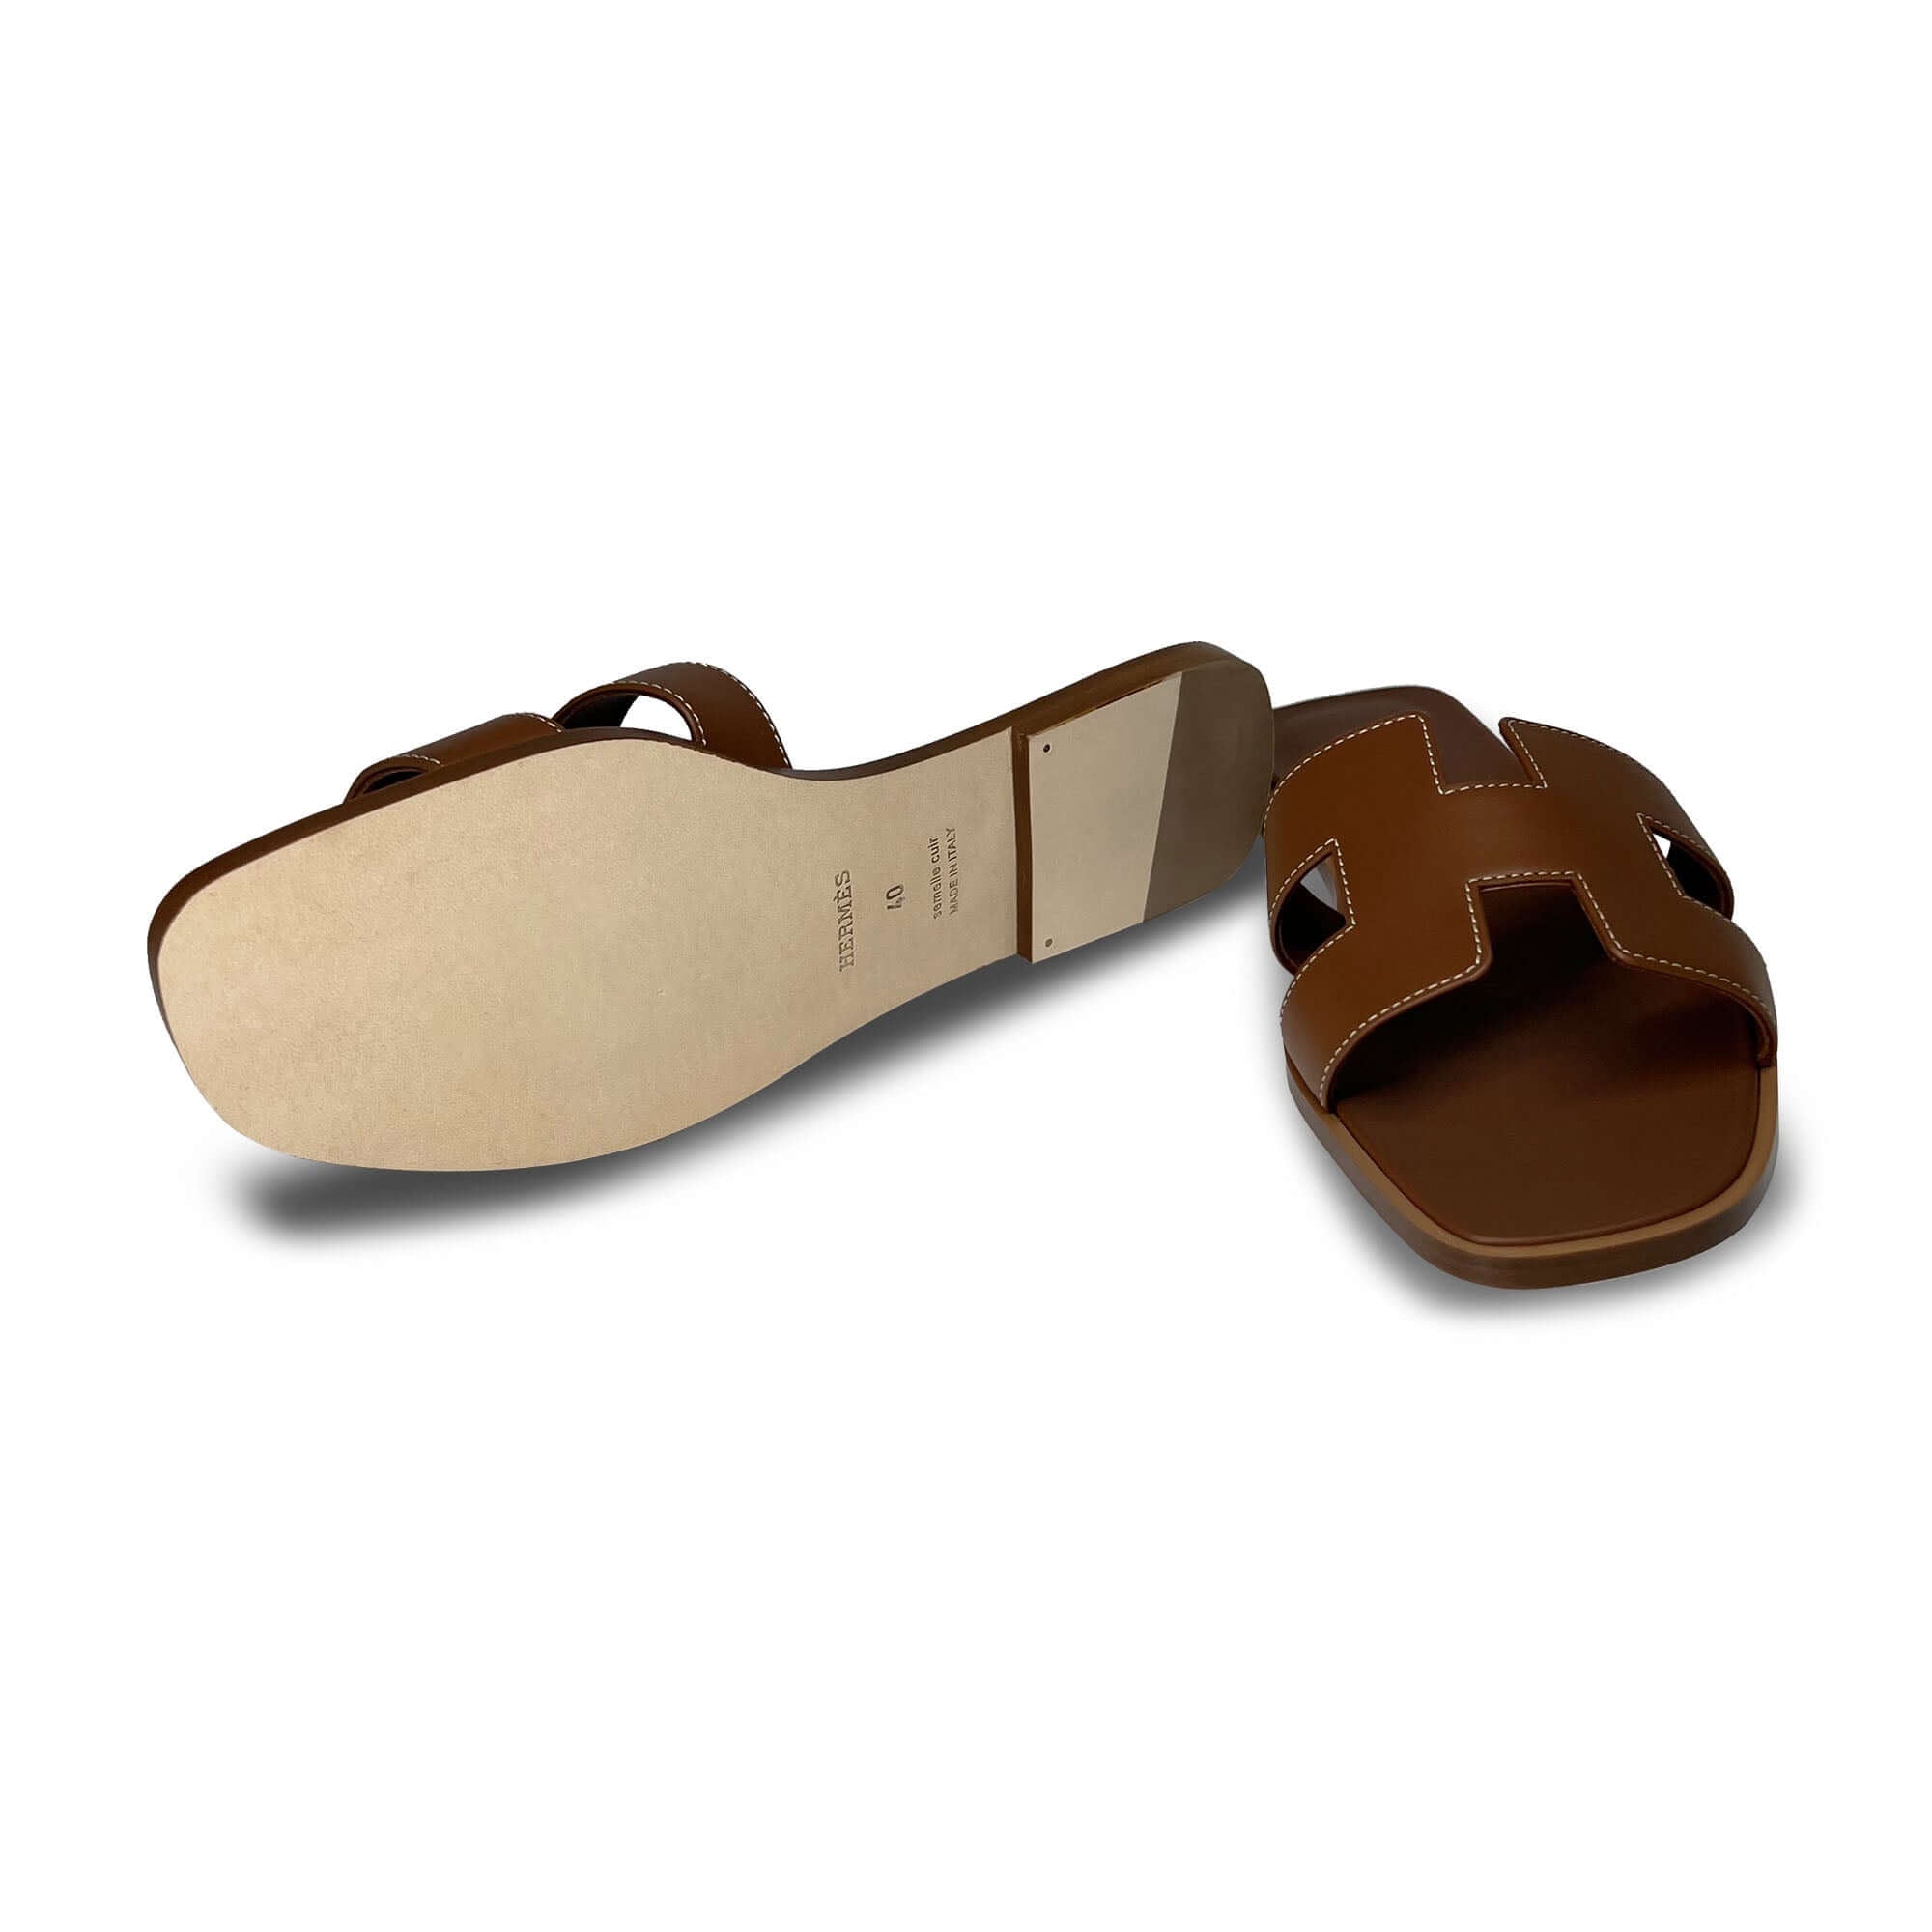 Hermes Oran Designer Leather Slippers in Brown with sole